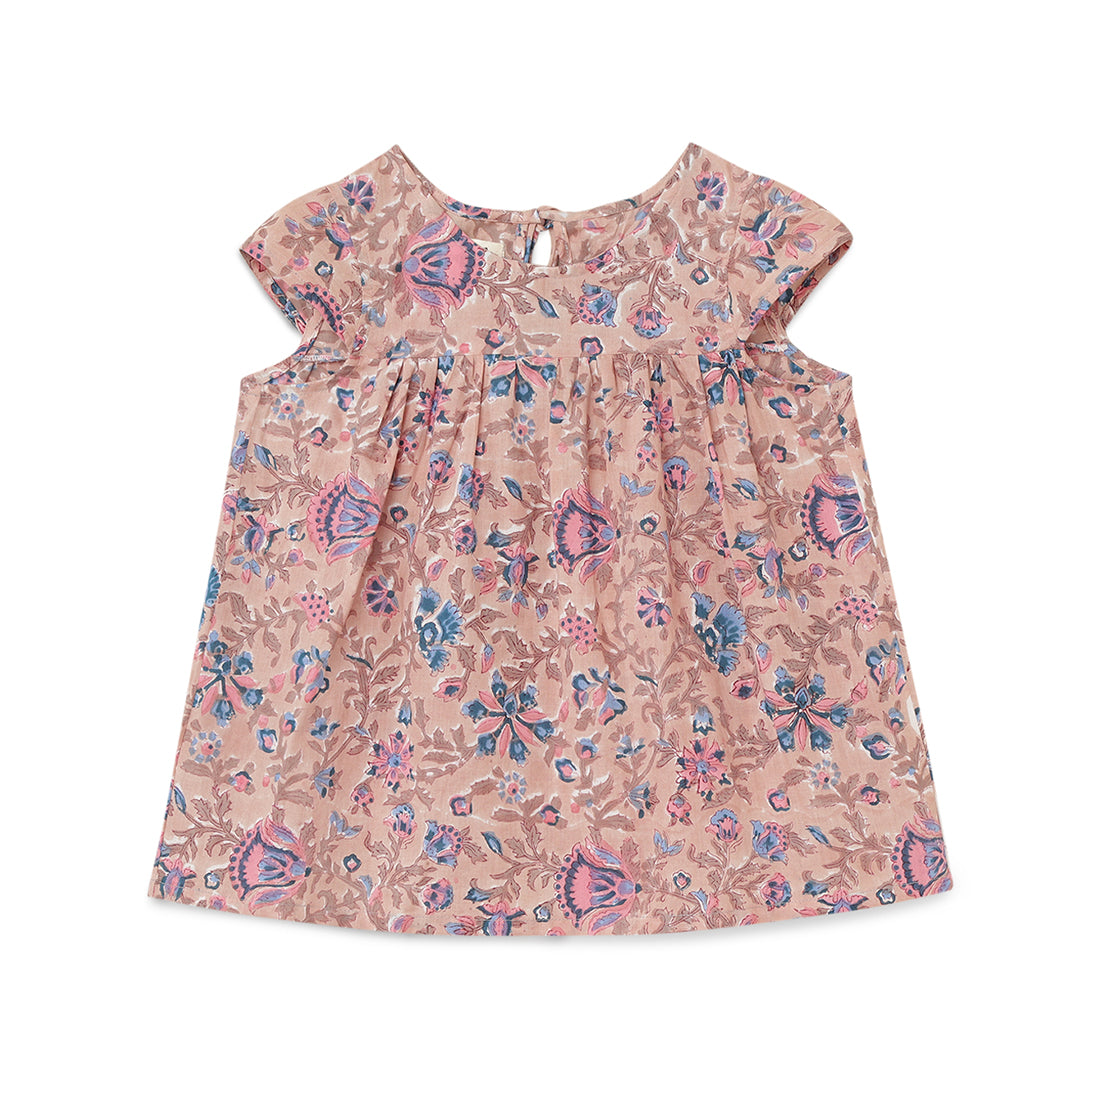 Girls Top and Shorts Set Light Brown with Green & Blue Print 2 yrs to 6 yrs - Front